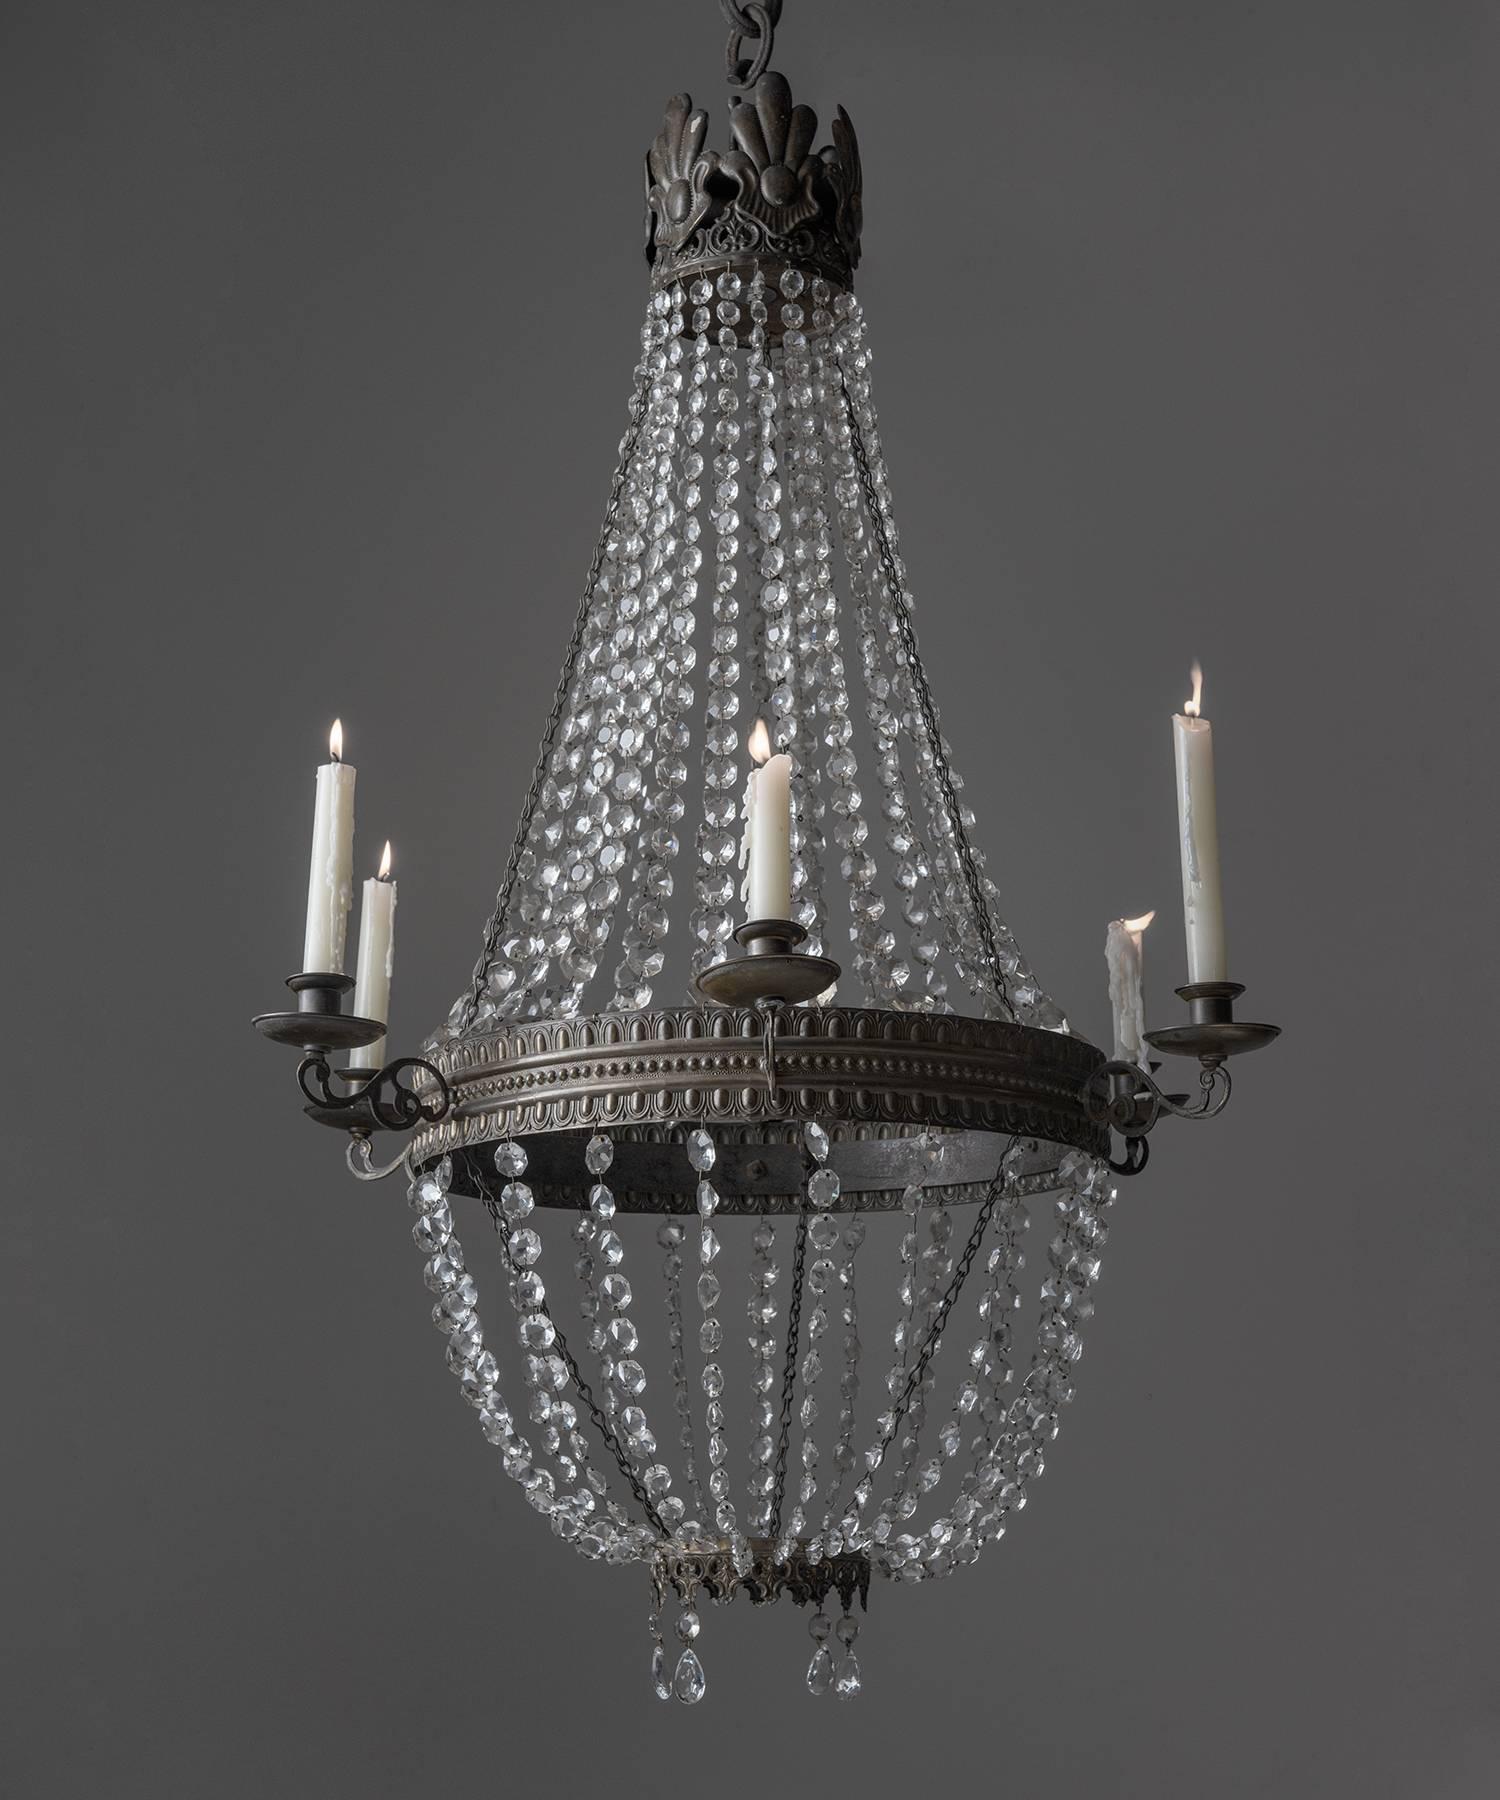 Crystal Candle Chandelier, Italy, circa 1870

Cascading crystal elements with bronze details. Holds (6) taper candles. Overall height is adjustable.